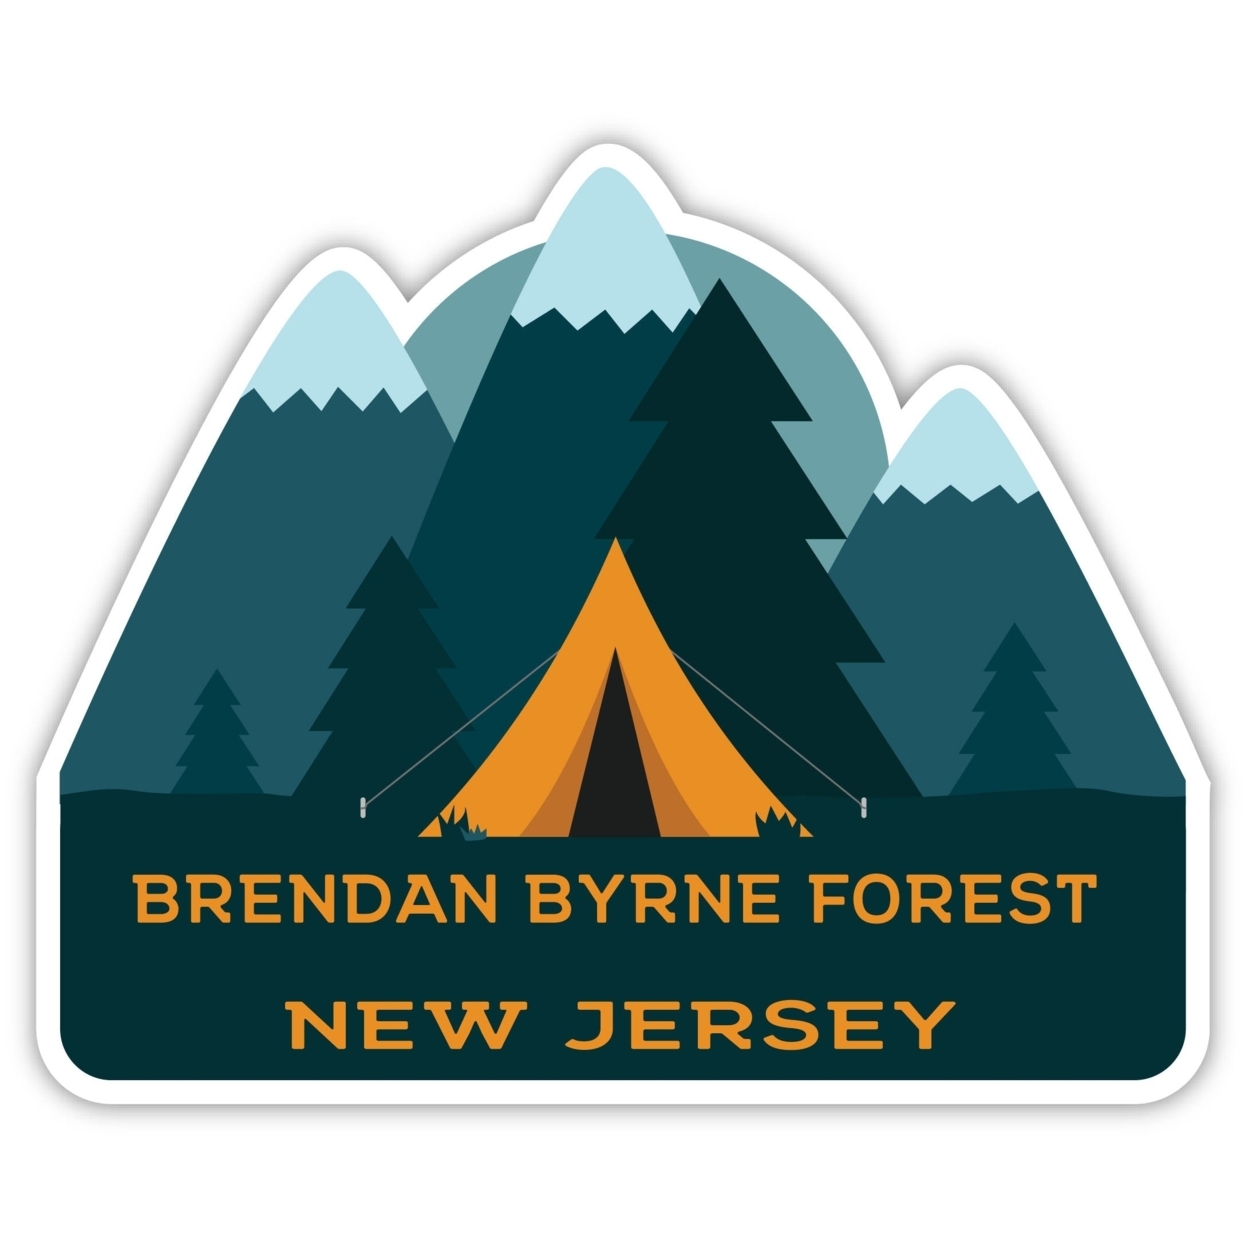 Brendan Byrne Forest New Jersey Souvenir Decorative Stickers (Choose Theme And Size) - Single Unit, 2-Inch, Tent